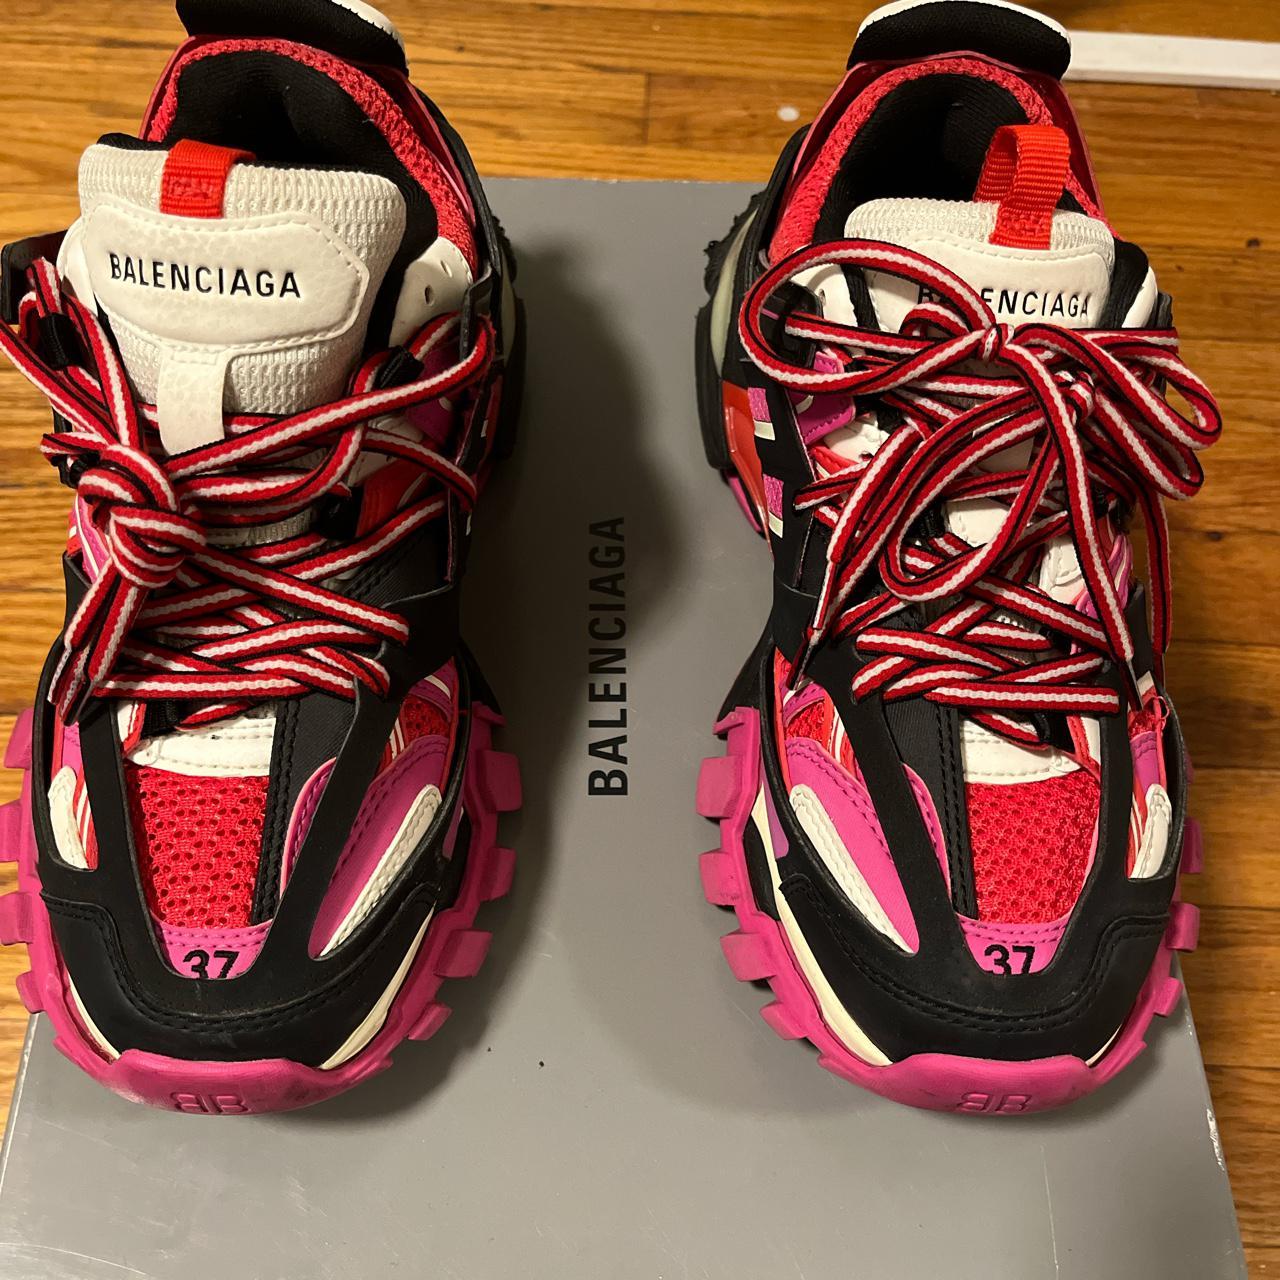 Authentic Balenciaga Track - Wms 10 - Pink/Red/Black, With Box & Bag  & Laces